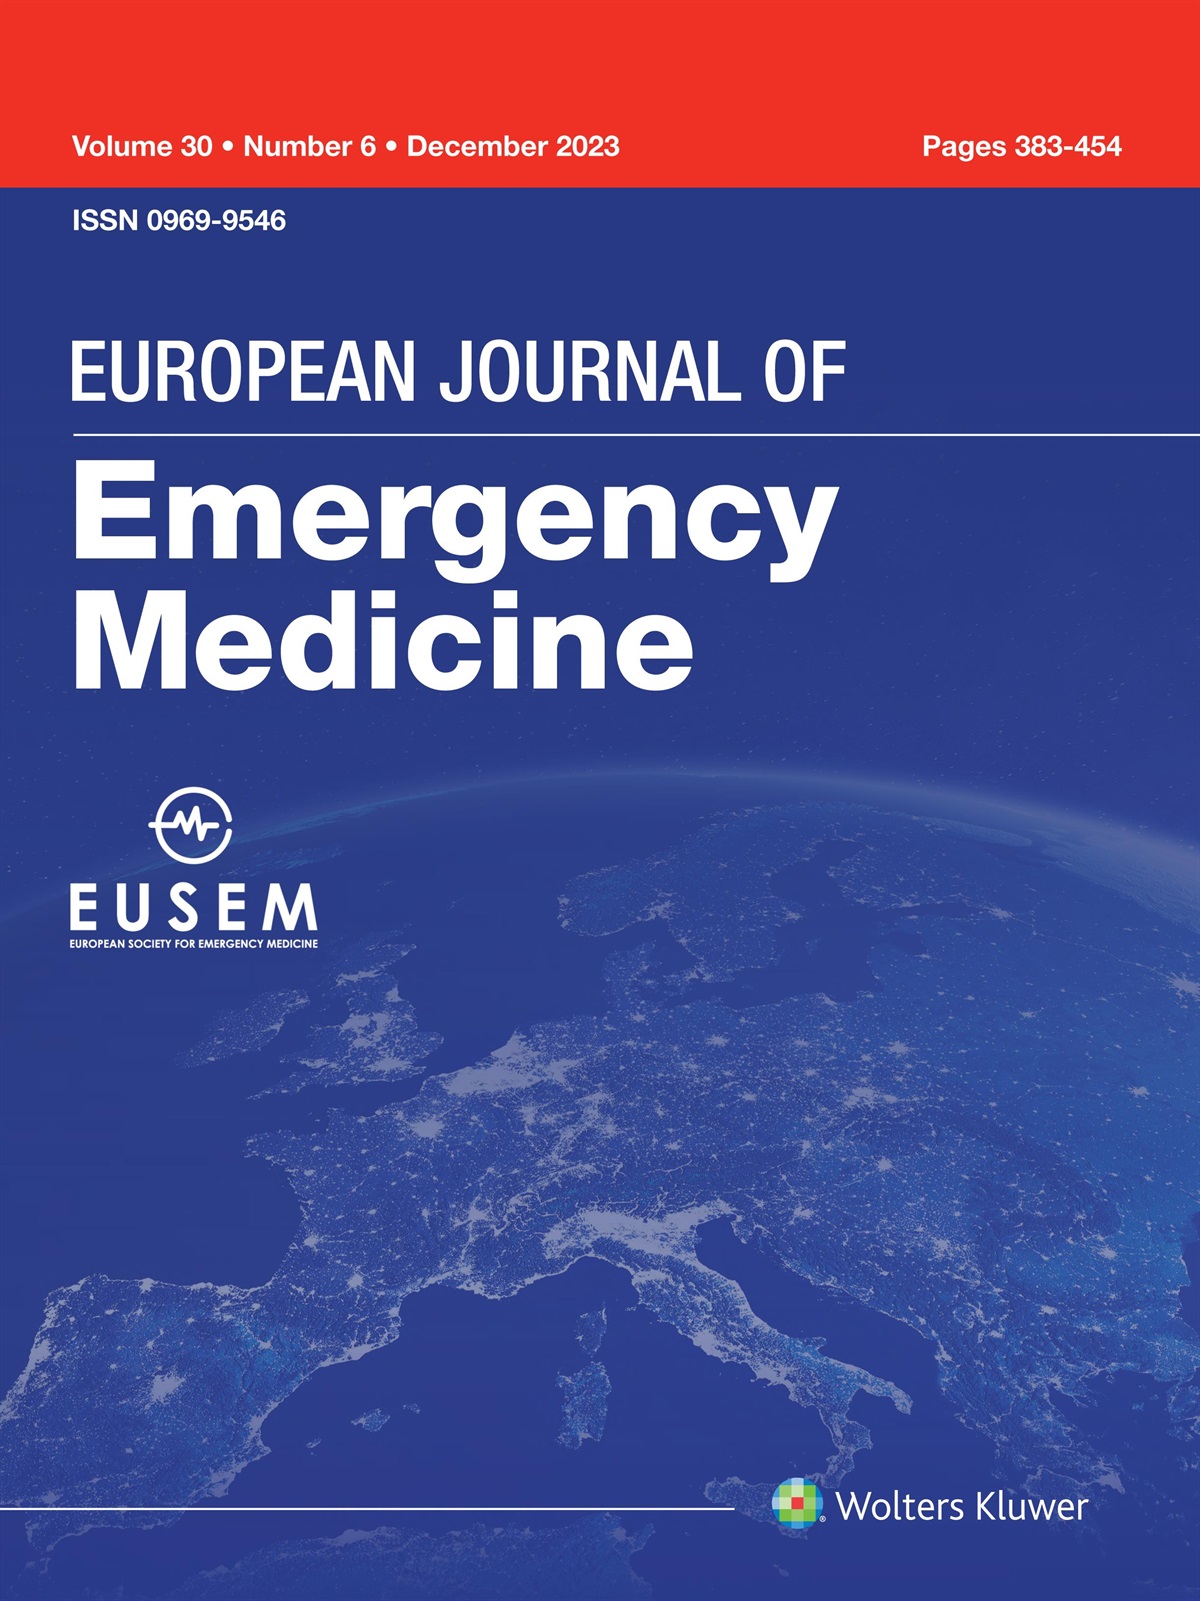 Overview of quality and safety in emergency medicine